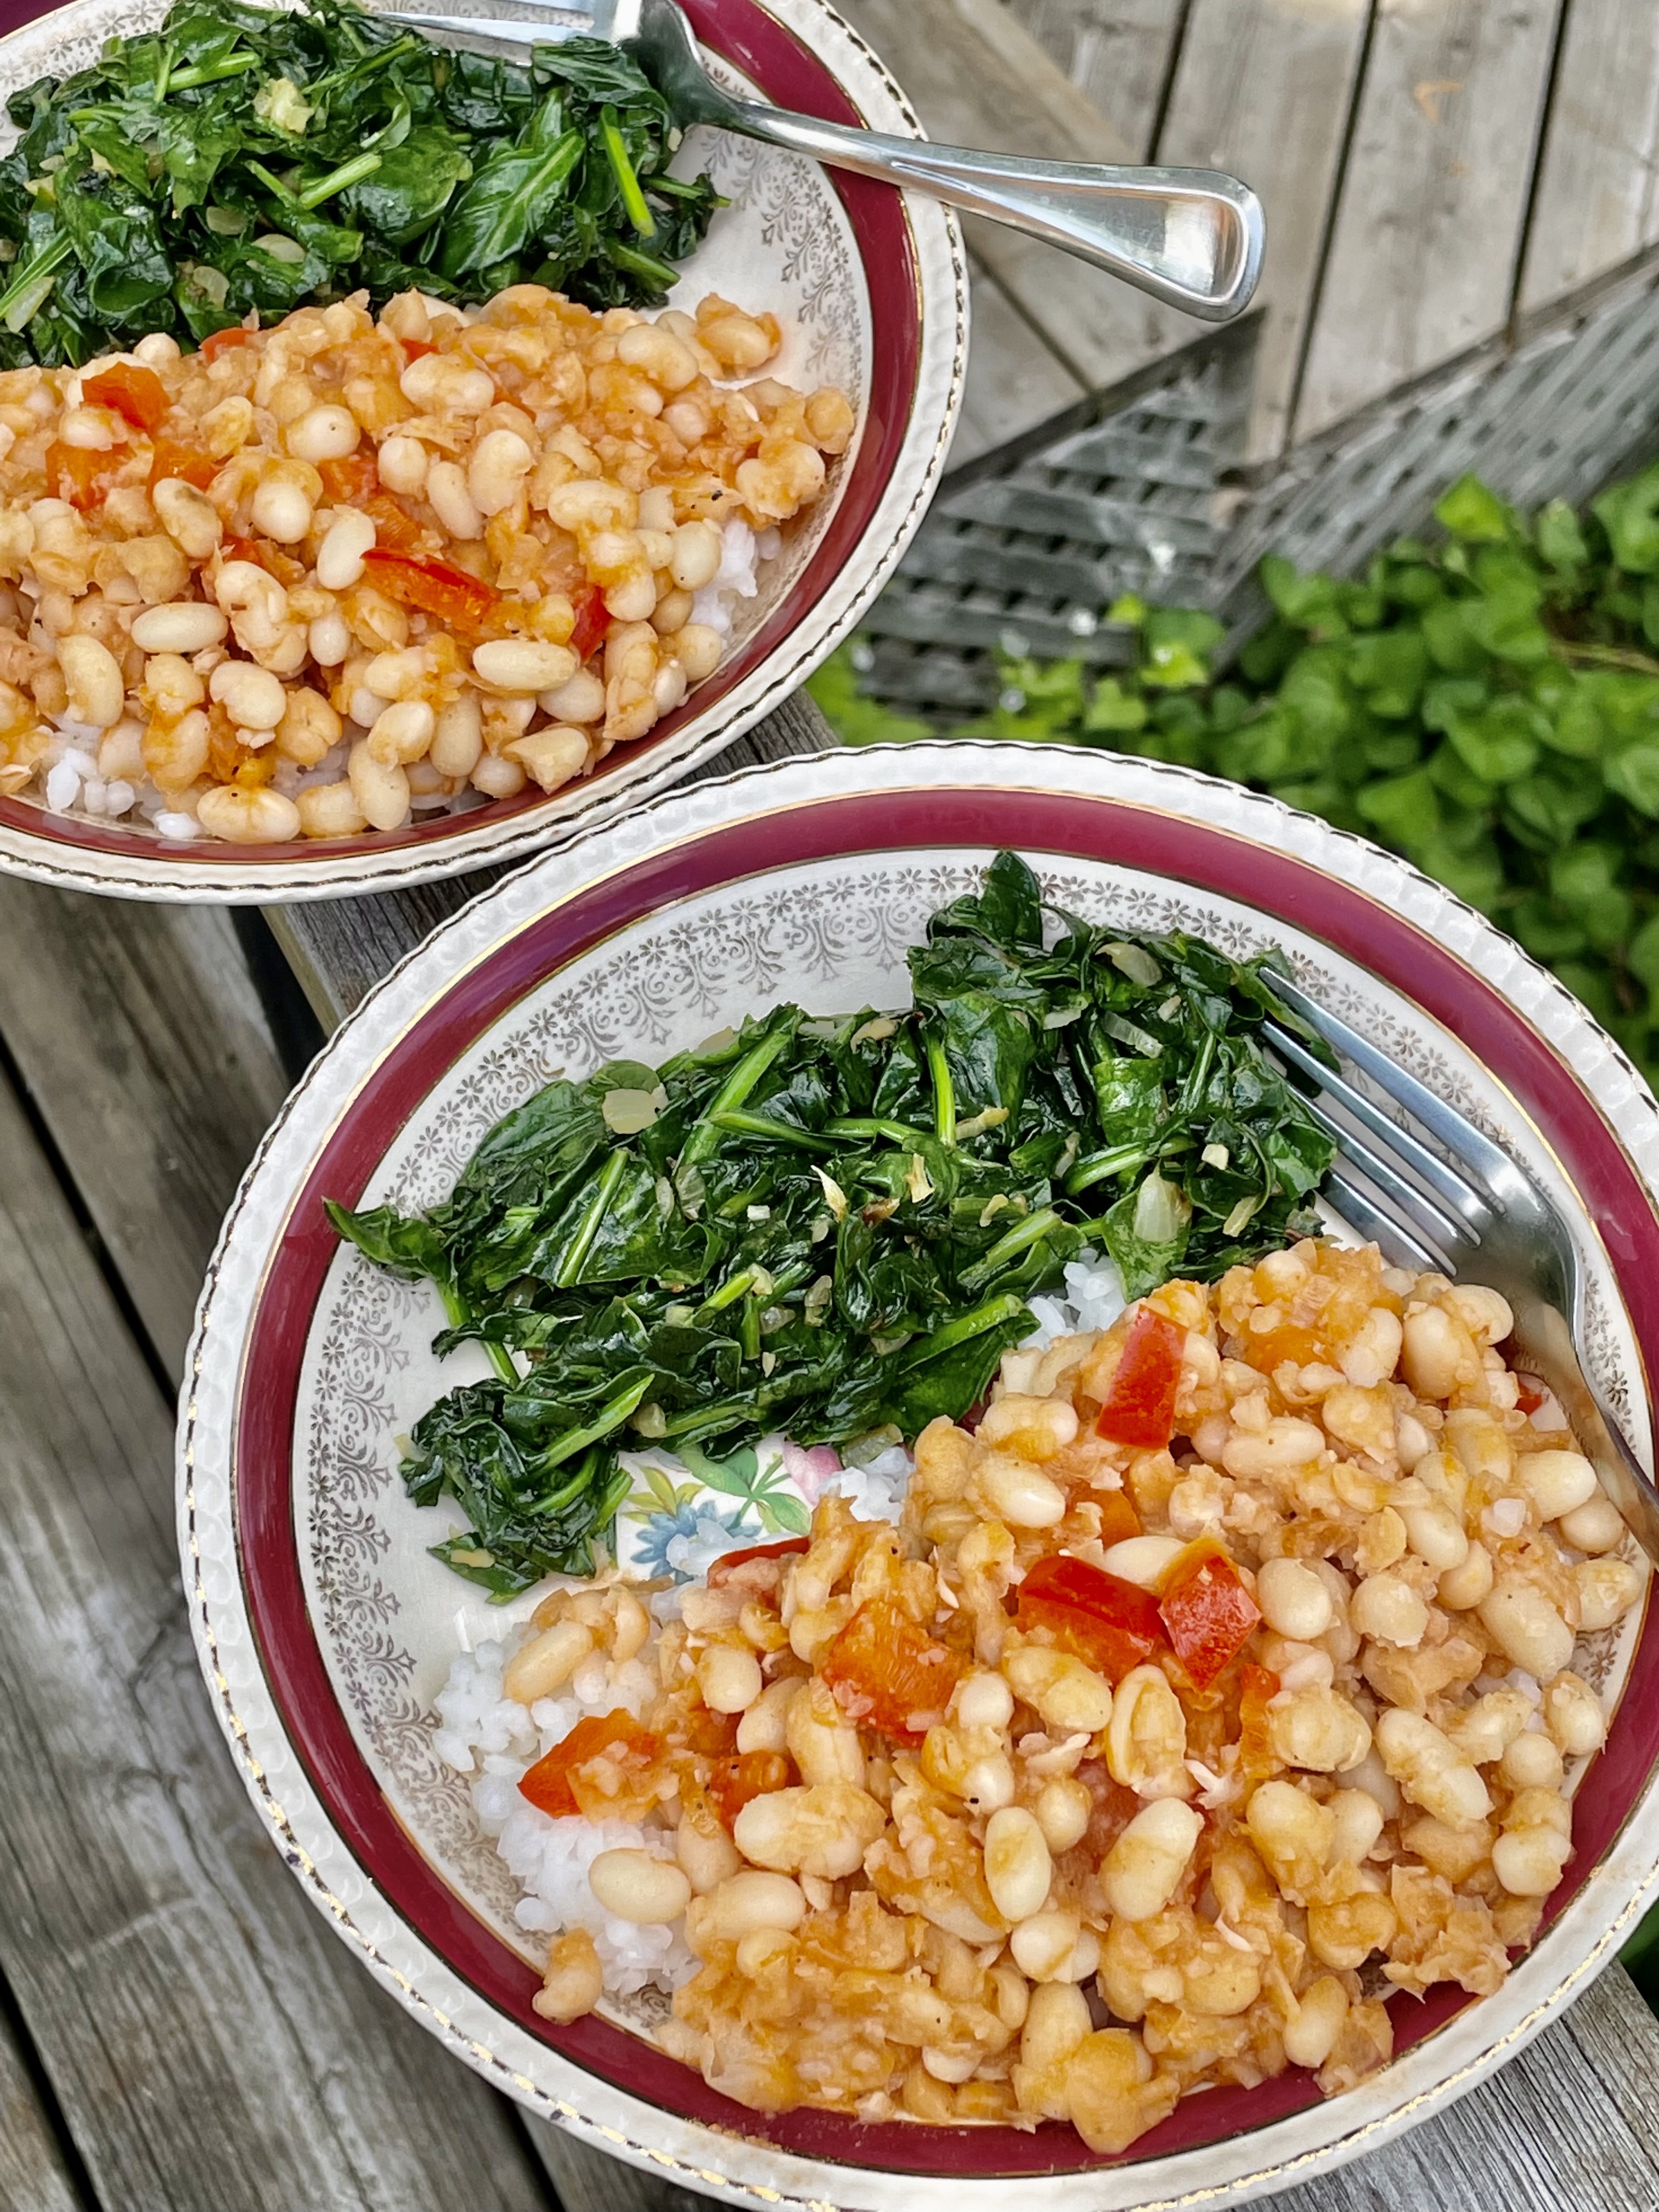 Spiced African Beans and Greens